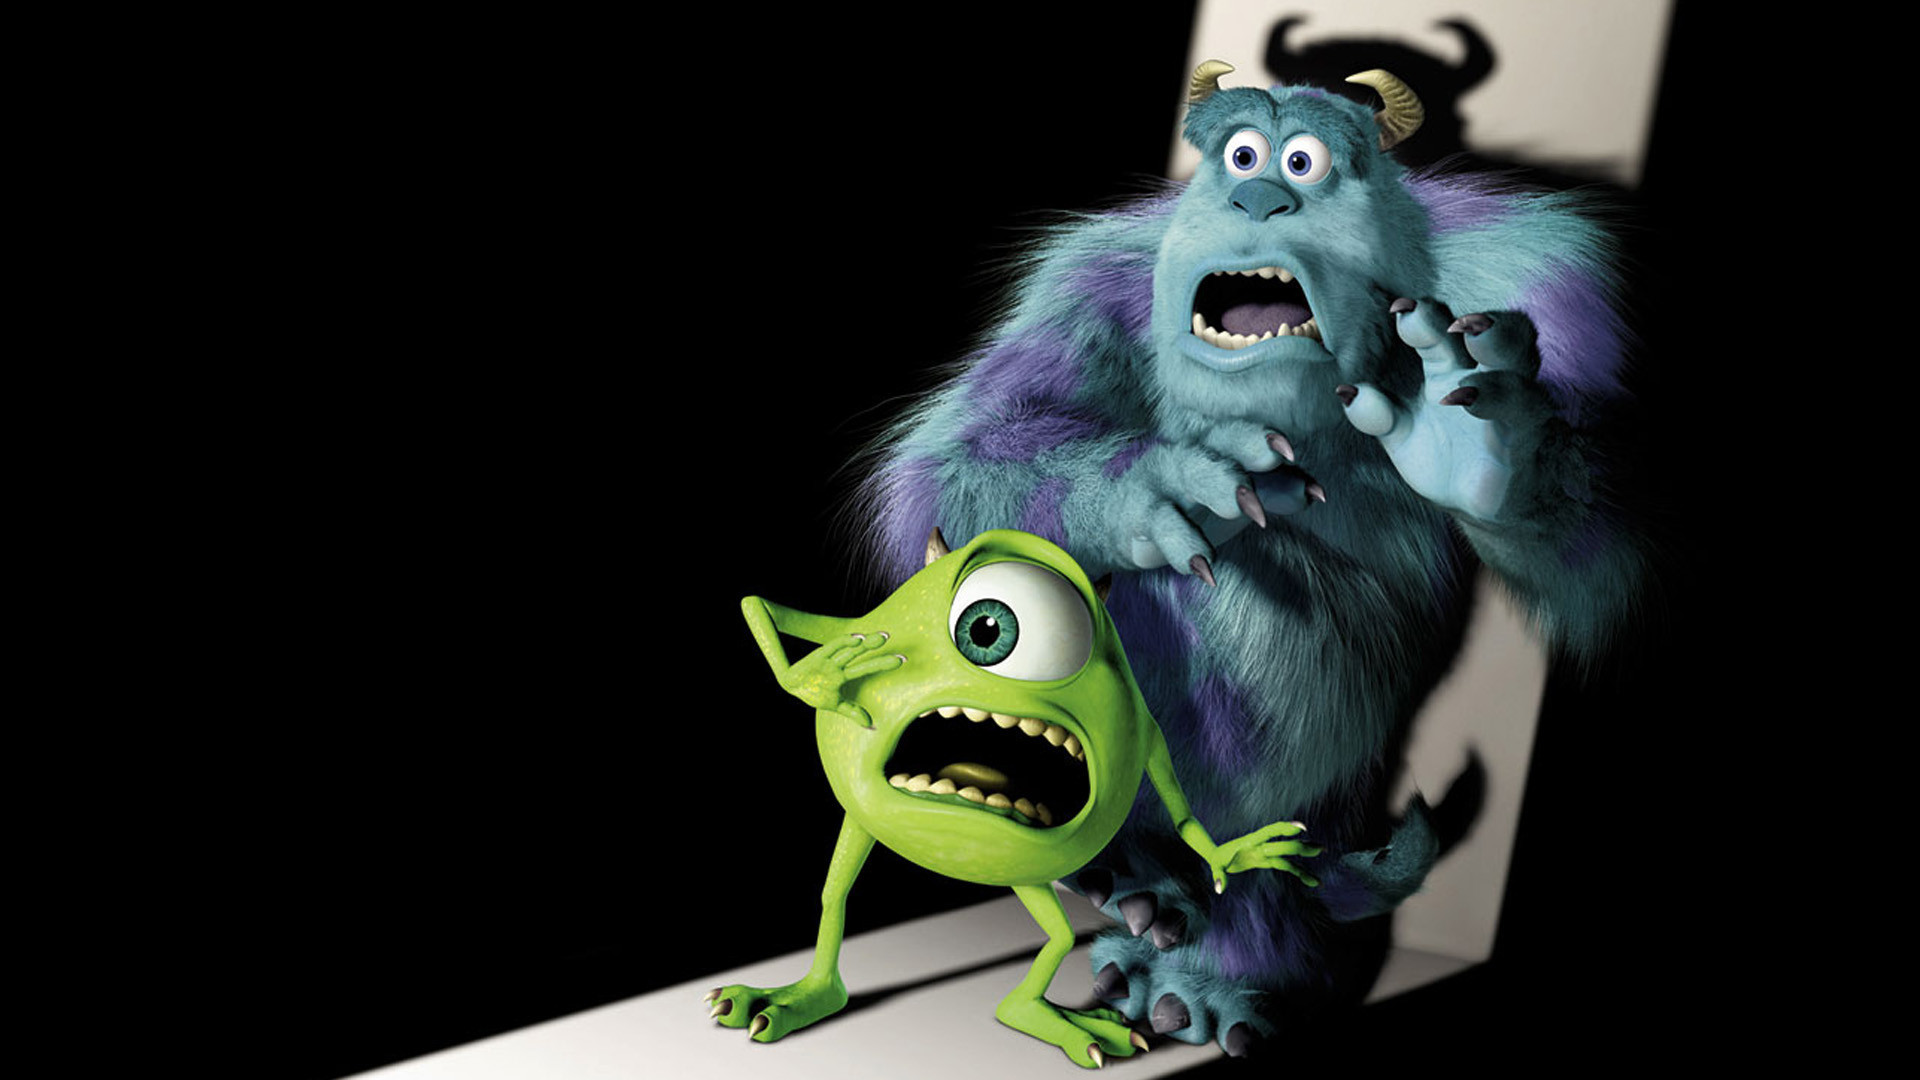 Monsters Inc Wallpapers HD Wallpapers 1920x1080